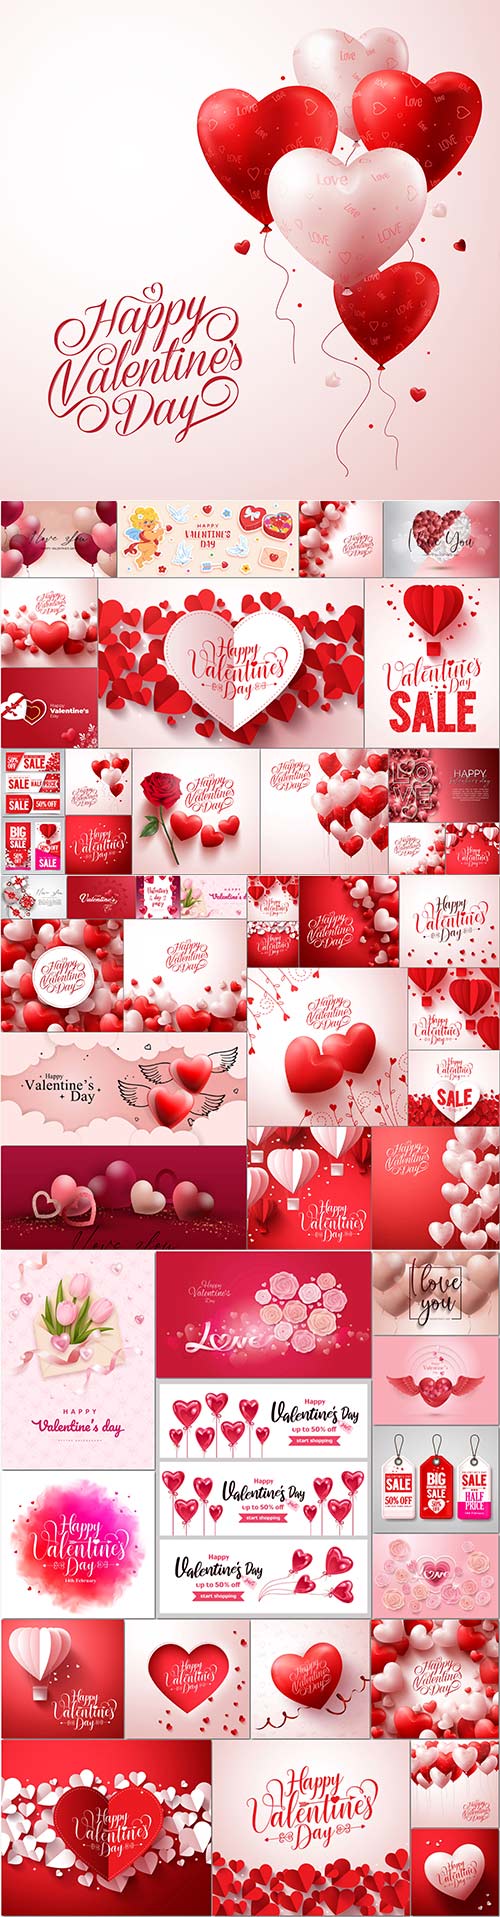 Valentines day concept background vector illustration red and pink hearts vector